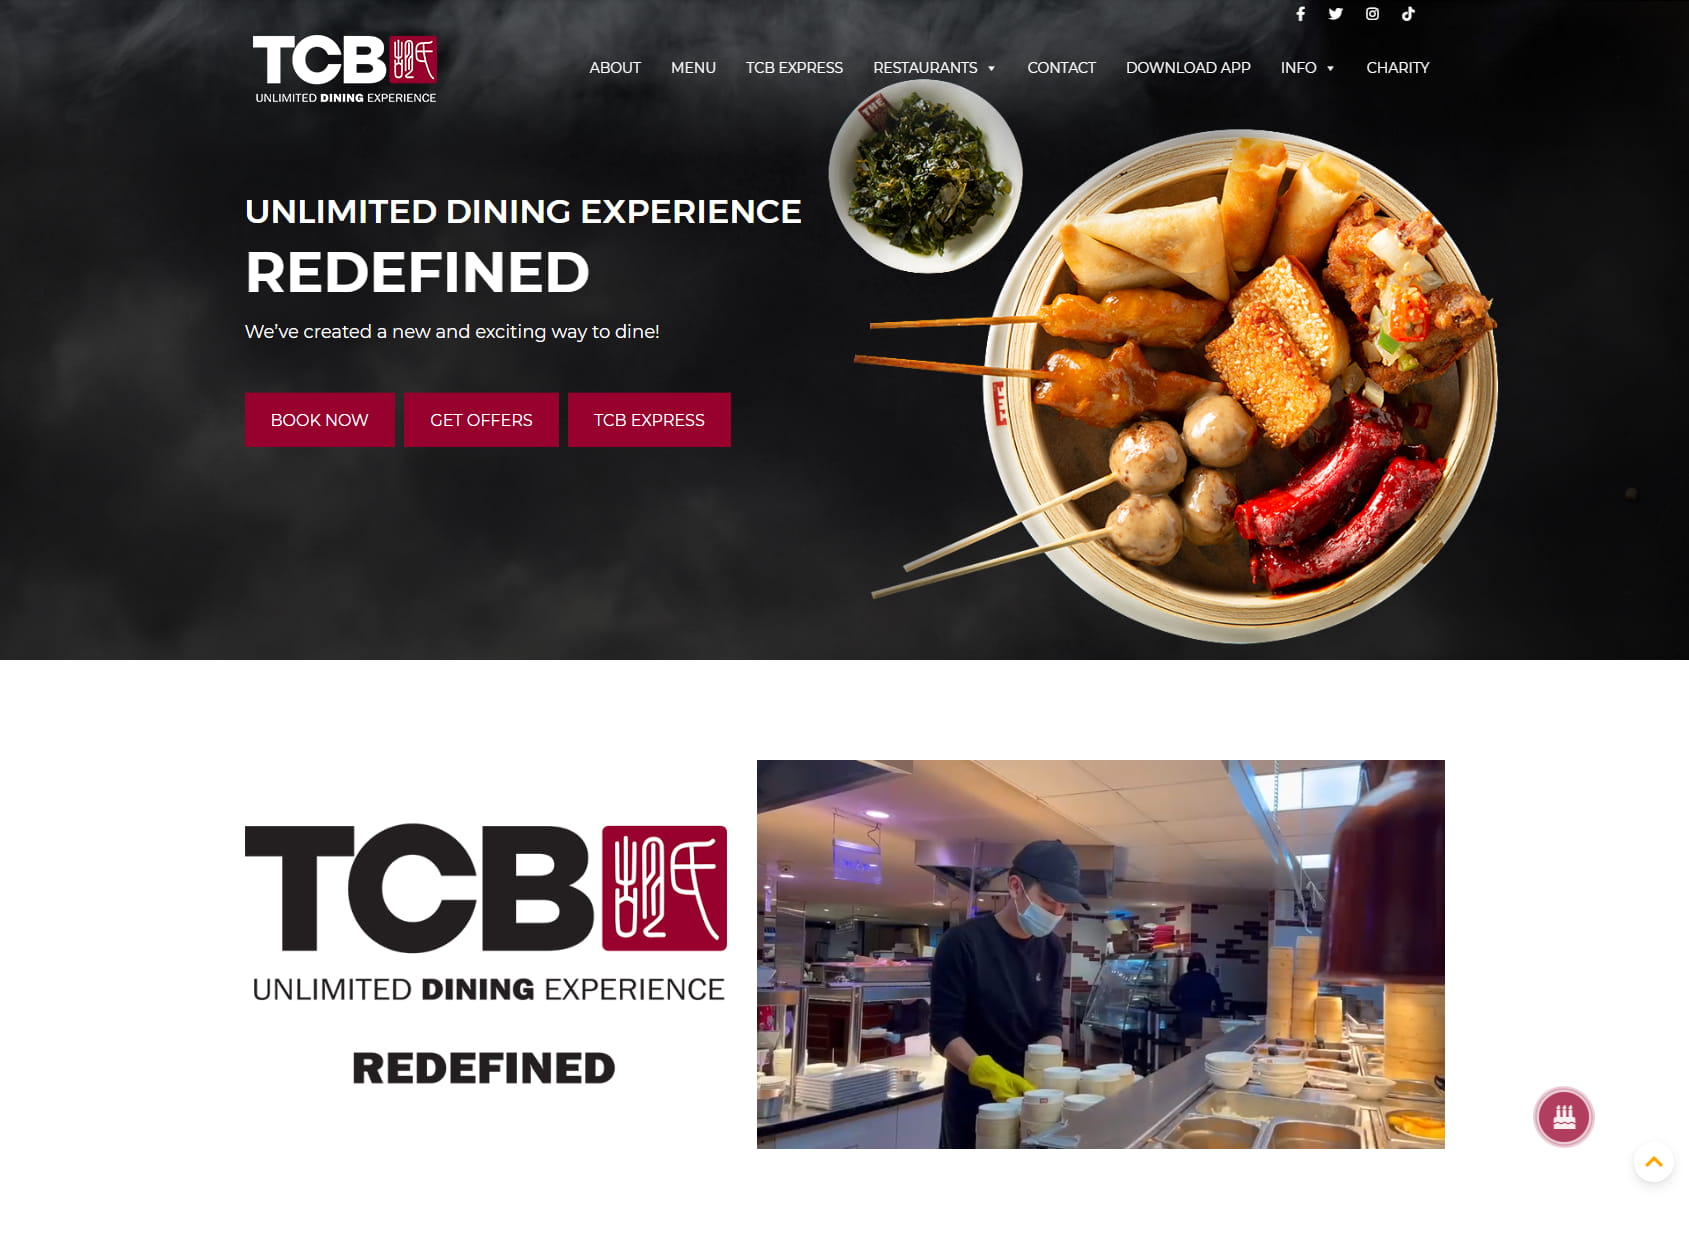 TCB Bolton - Unlimited Dining Experience